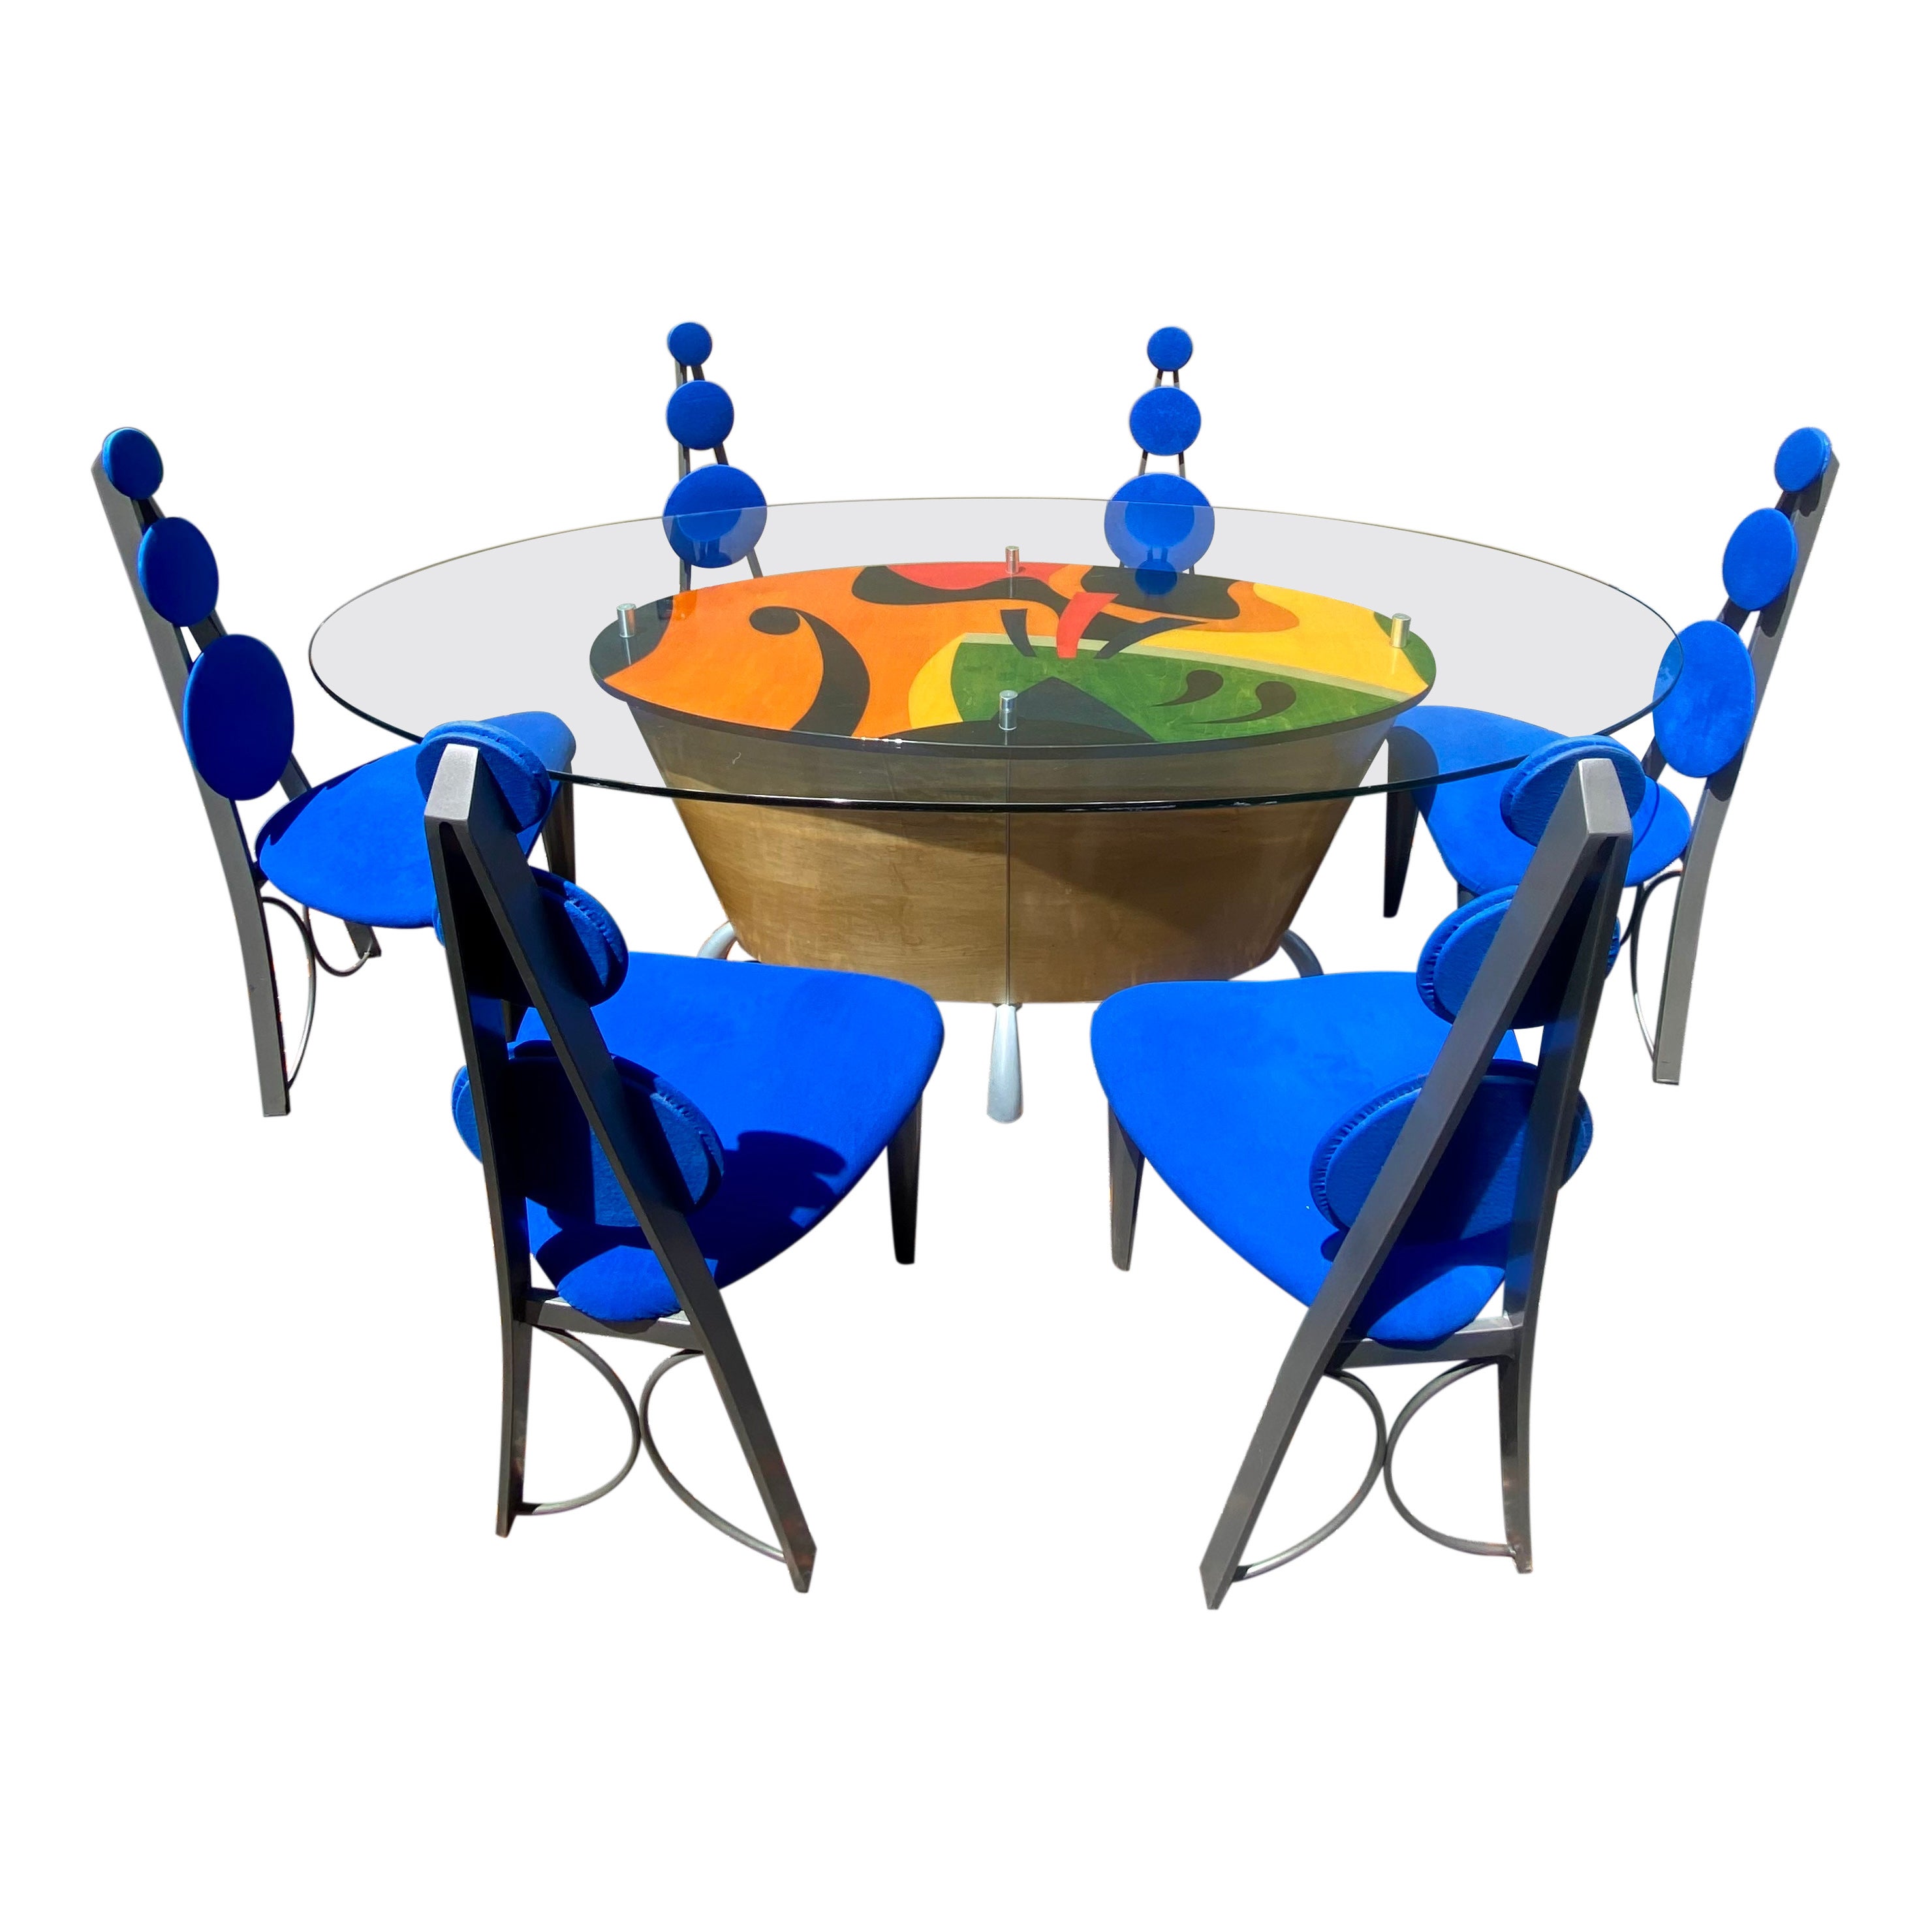 1990s Multi-Colored Sculptural Memphis Style Dining Table & 6 Chairs For Sale